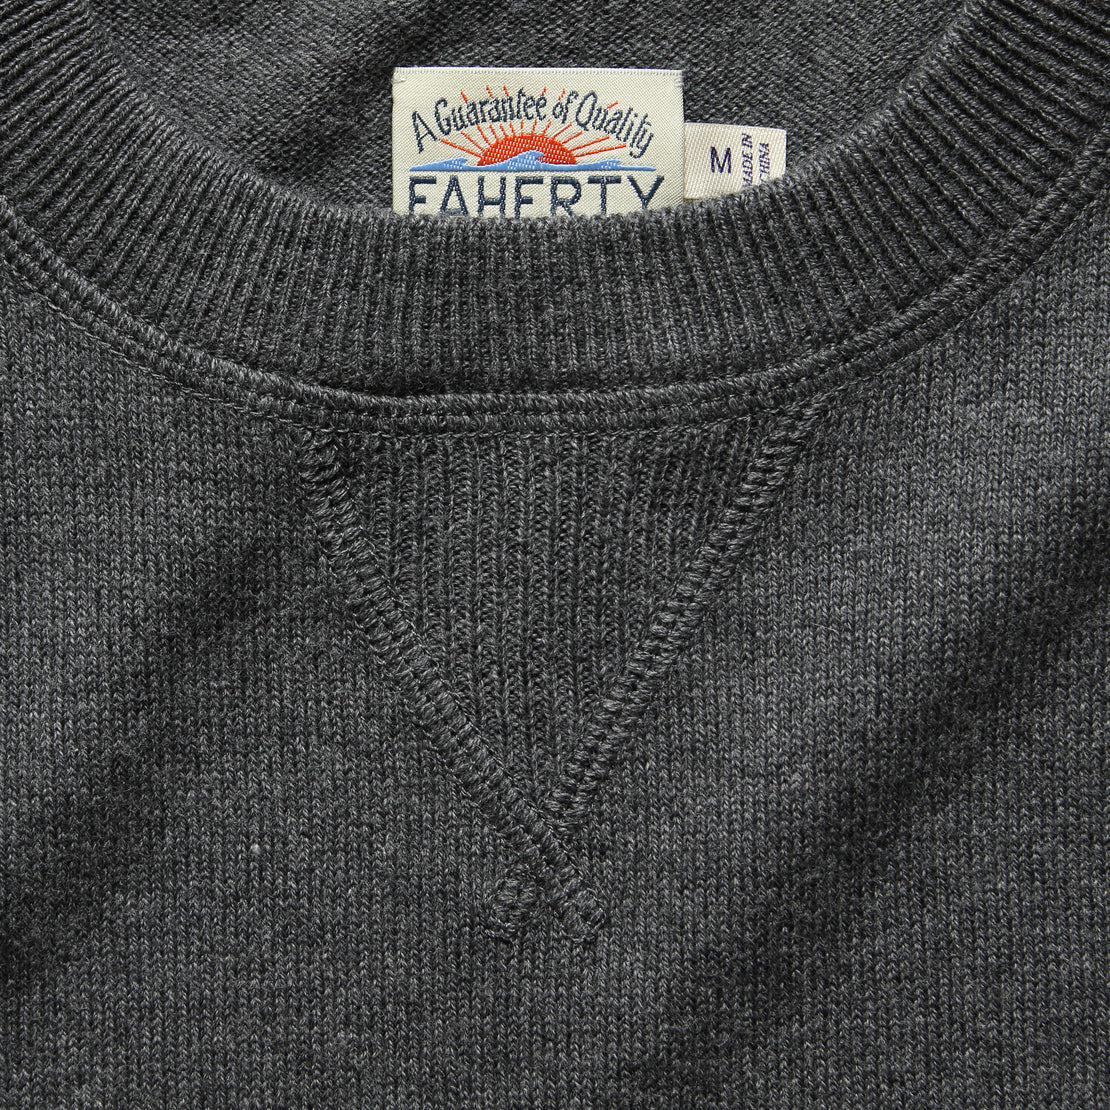 Sconset Crew Sweater - Ash Heather - Faherty - STAG Provisions - Tops - Sweater